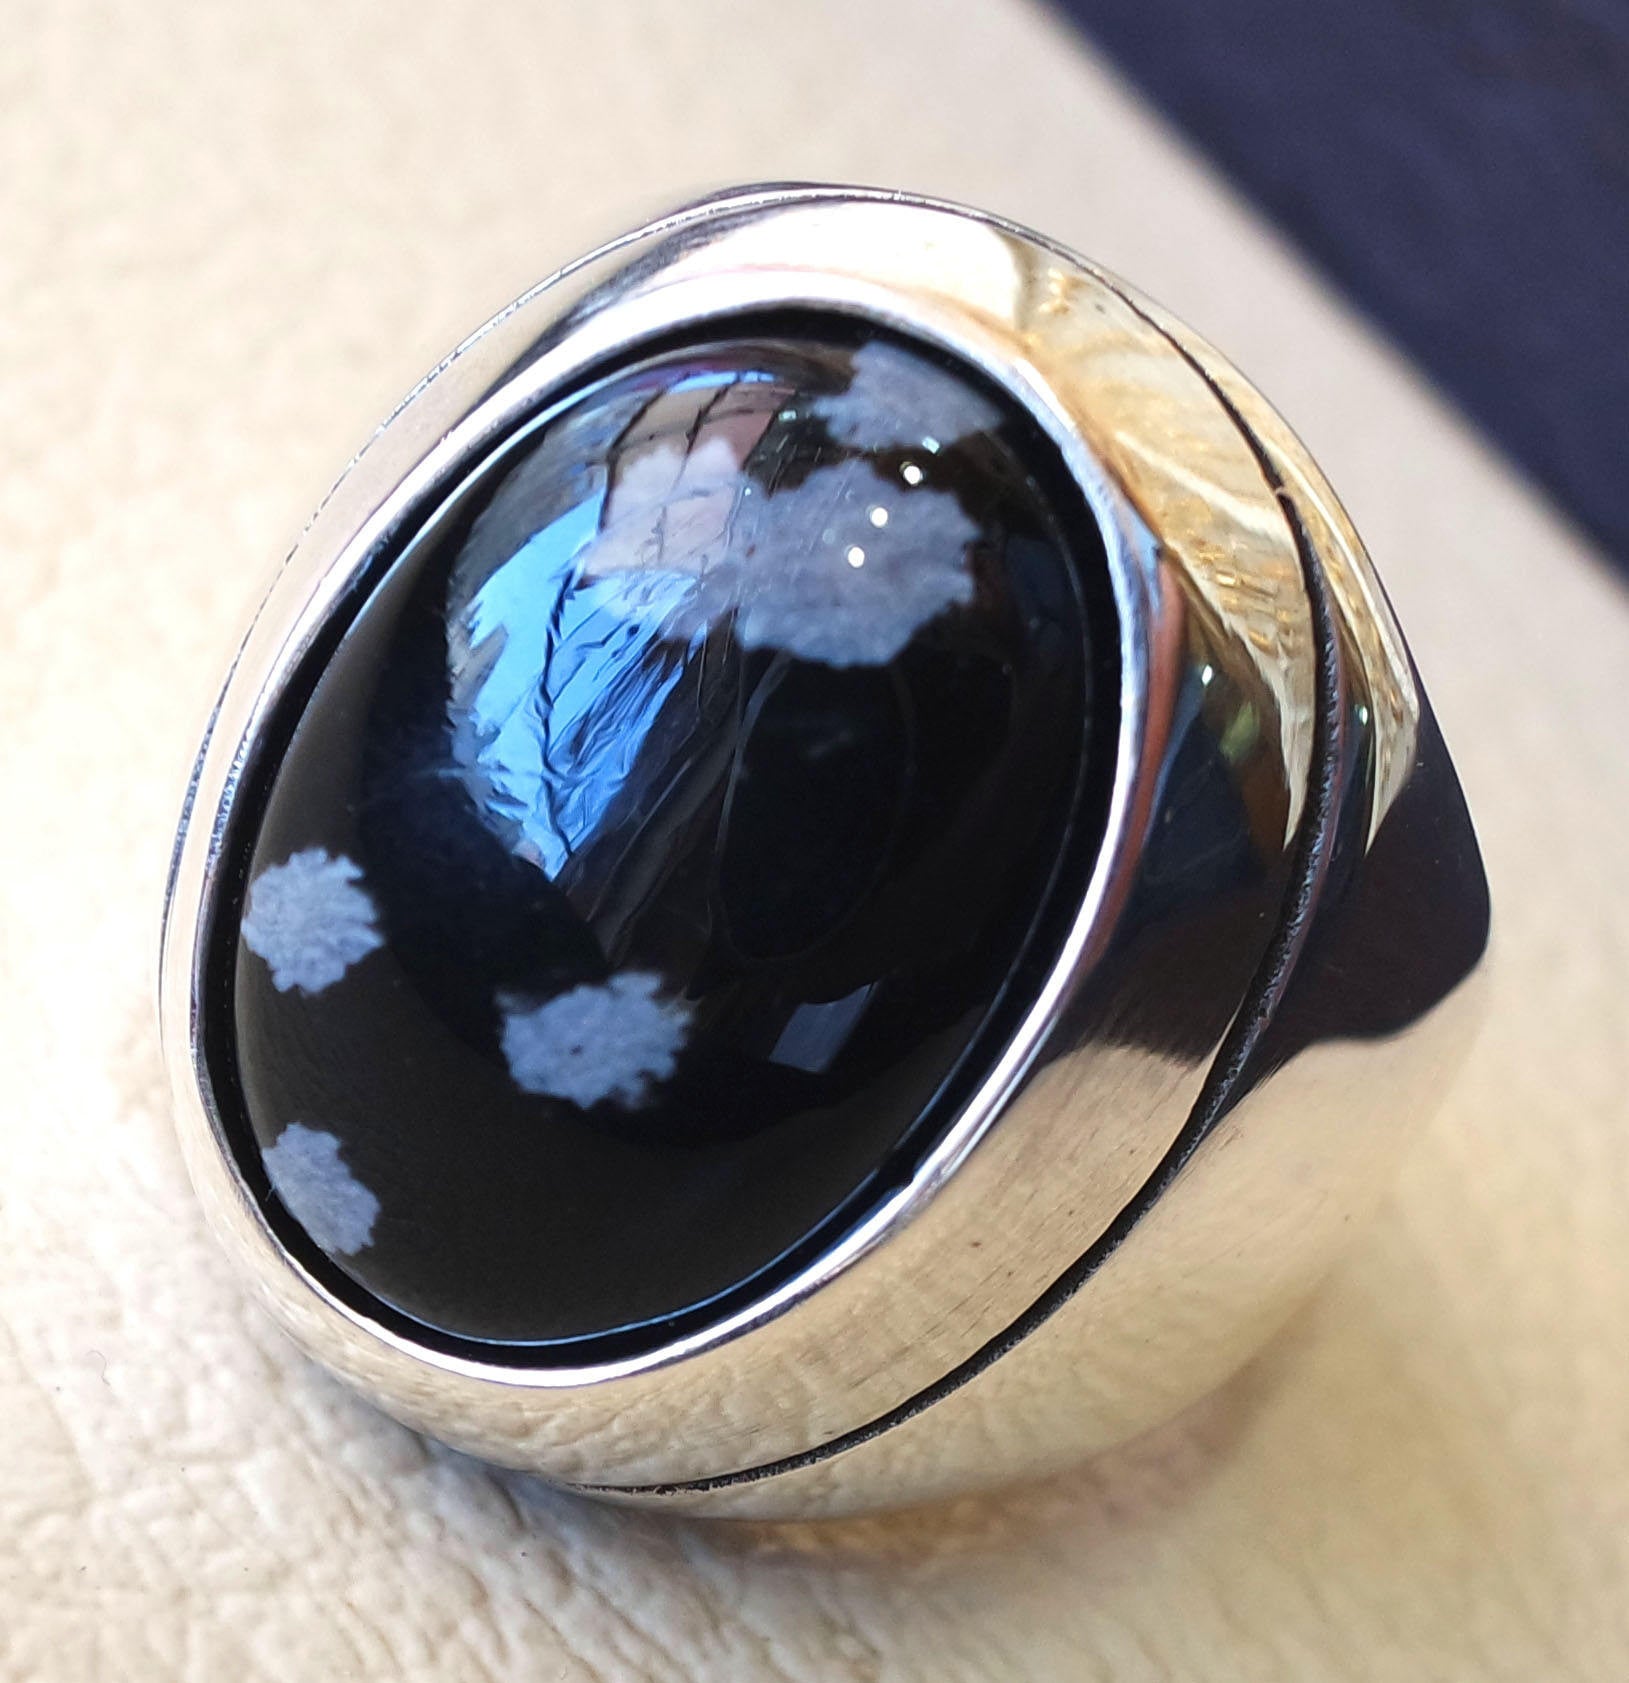 Snowflake obsidian black aqeeq heavy men ring natural stone sterling silver 925 vintage turkish style all sizes  fast shipping